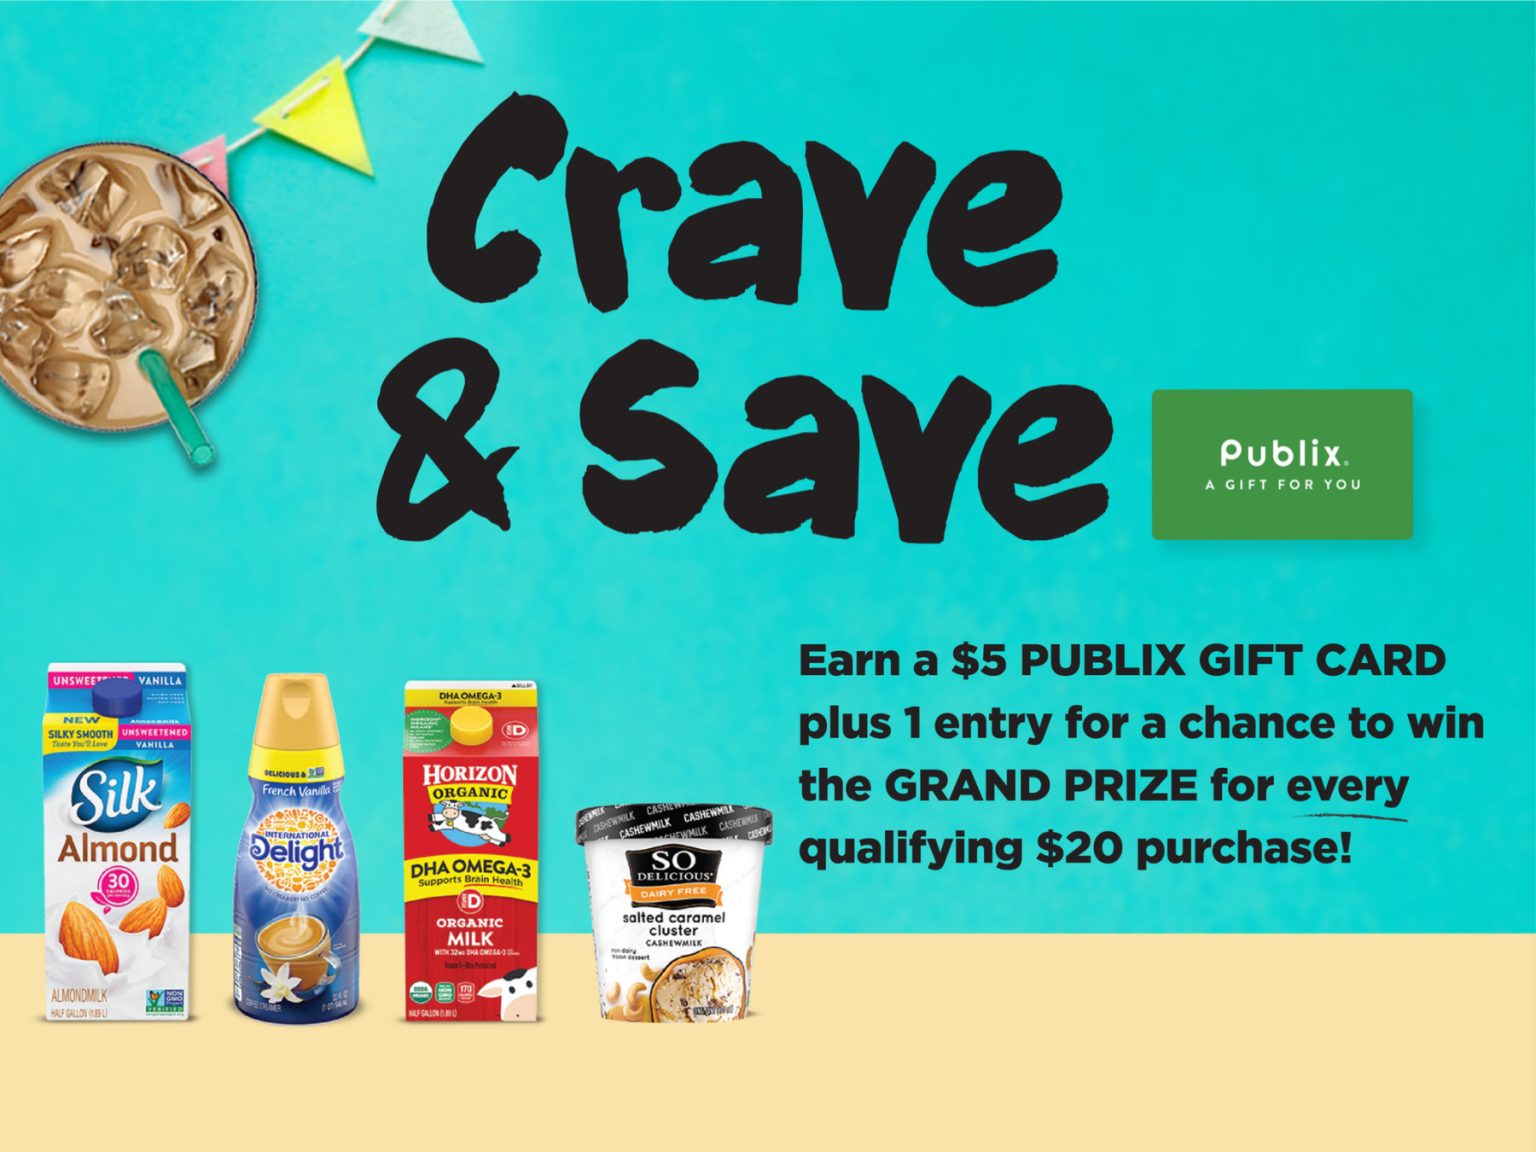 Earning Publix Gift Cards With The Crave & Save Program Look For